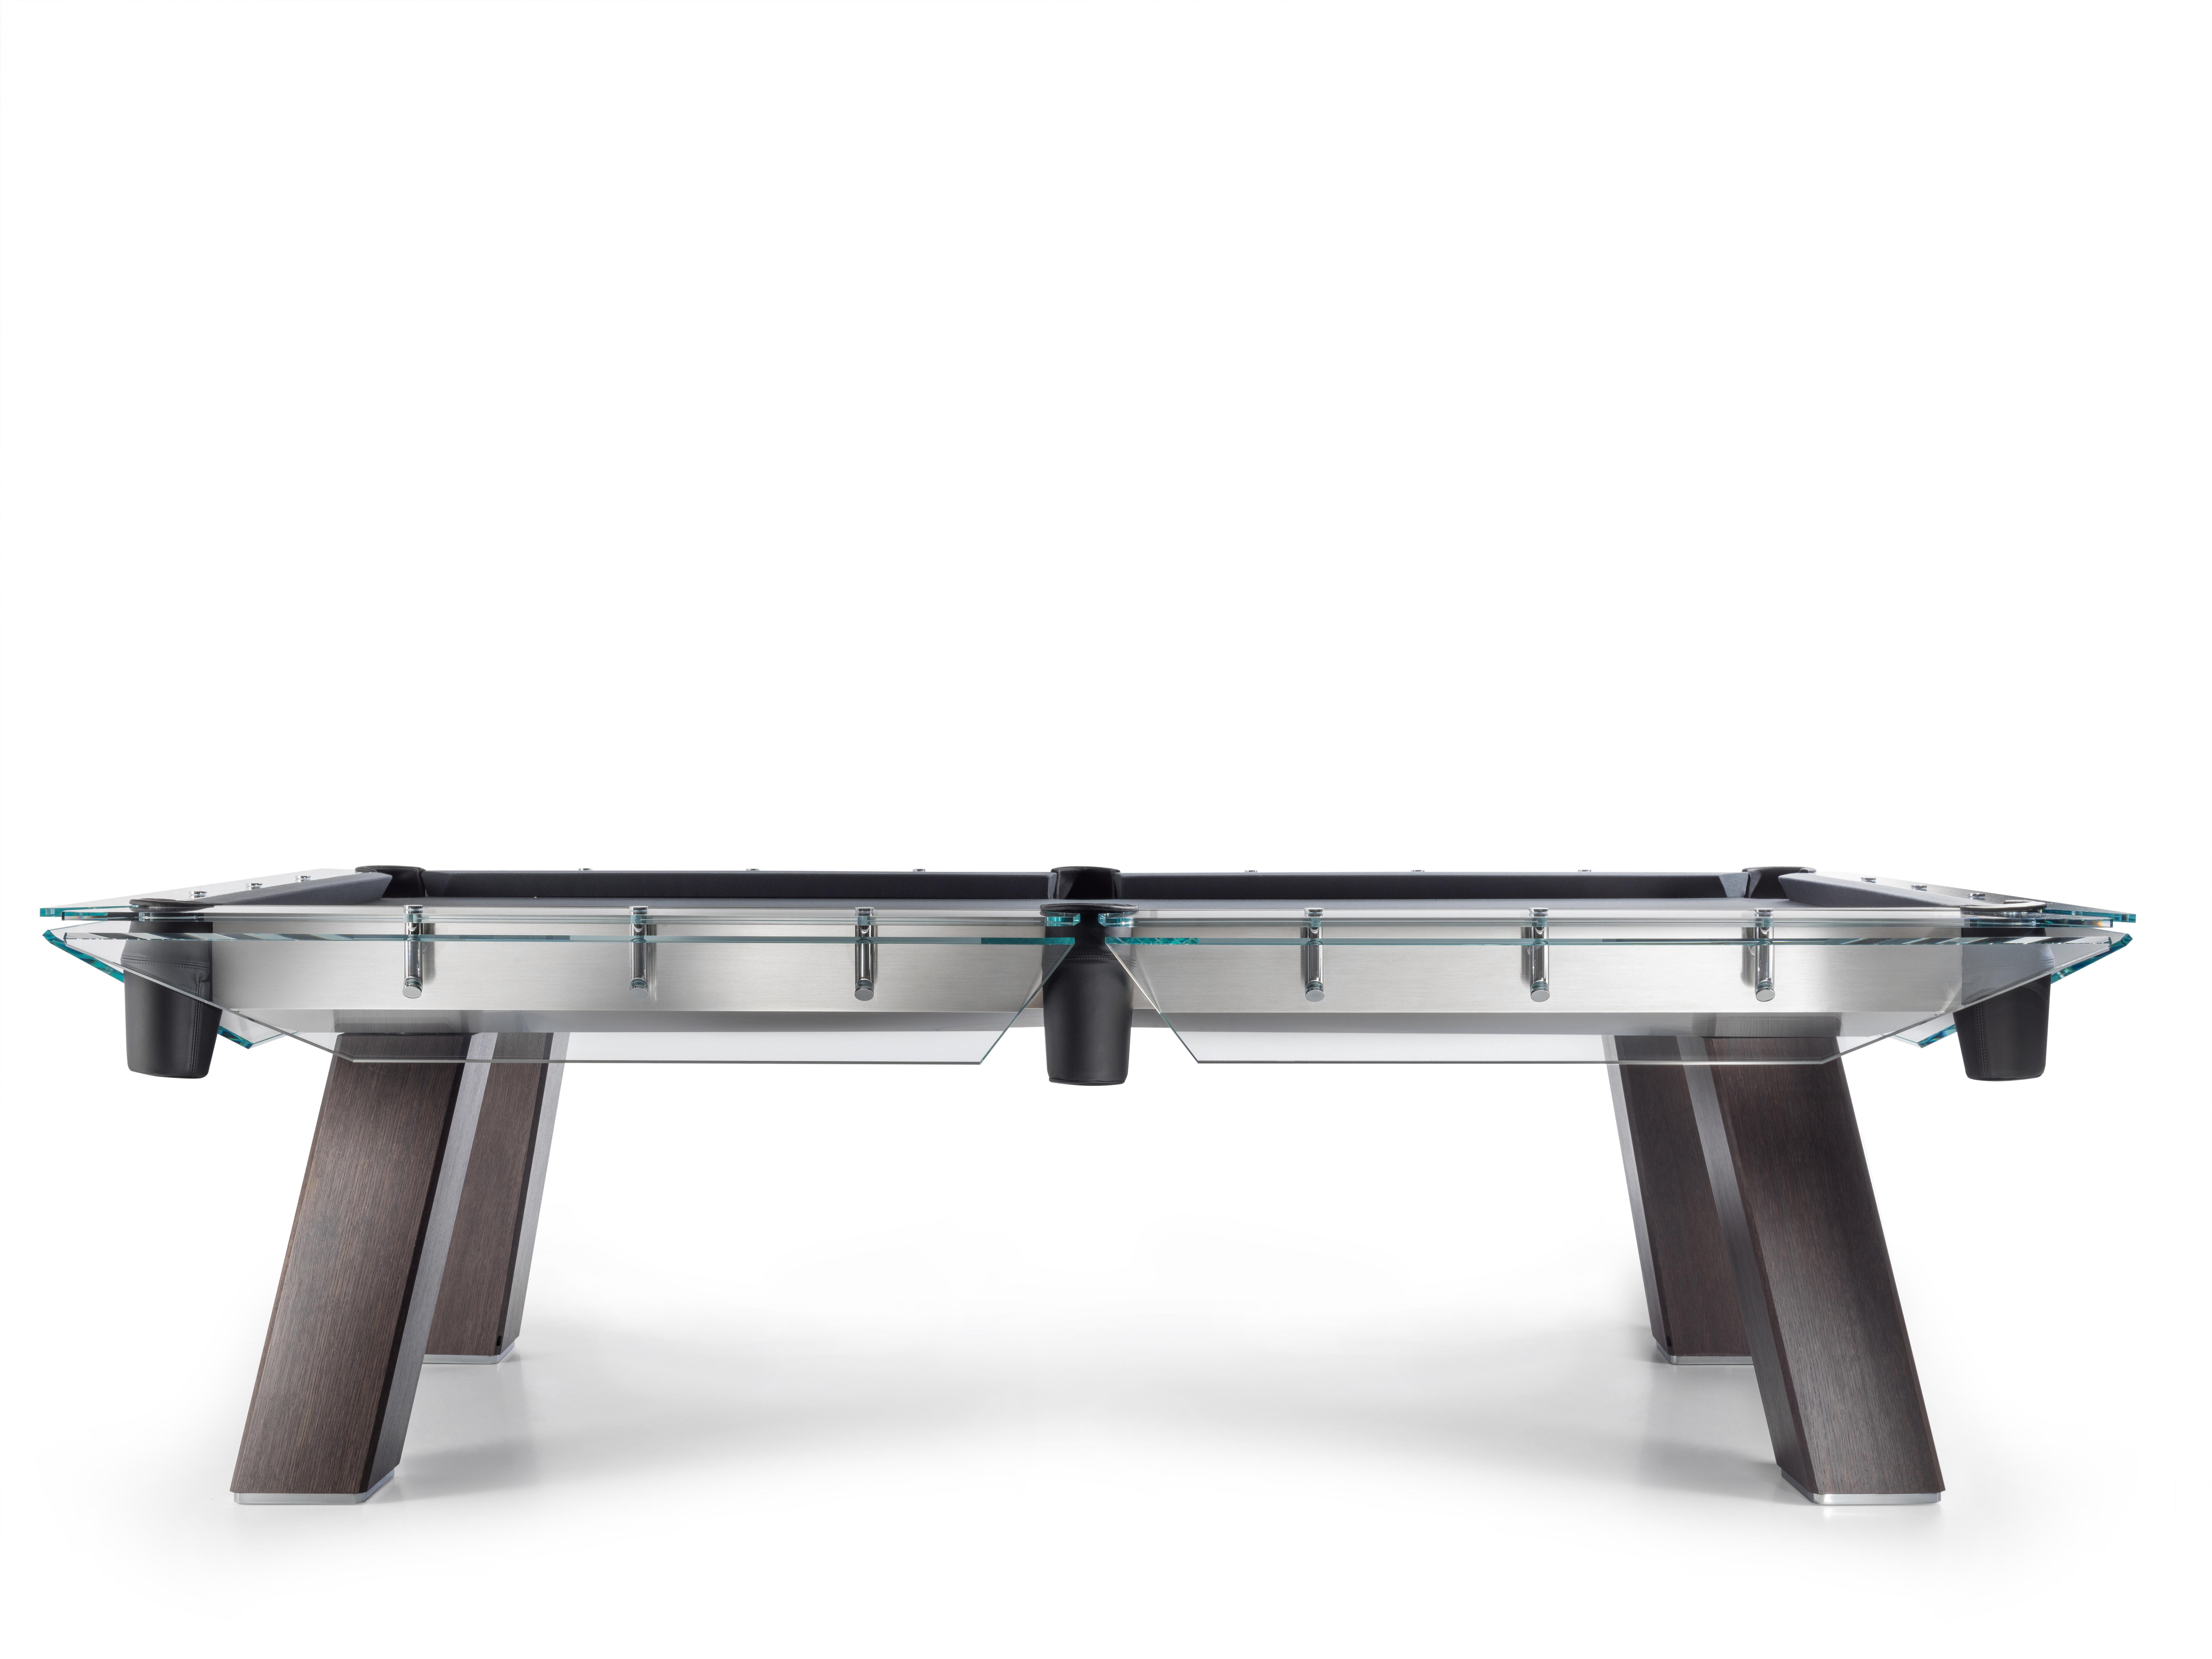 Filotto wood dark oak player pool table by Impatia
Dimensions: D 268 x W 152 x H 82 cm
Weight: 640 kg
Material: frame in low-iron glass.Legs in wood. Metal components. Three piece Italian slate base, simonis cloth, leather pockets.
Also